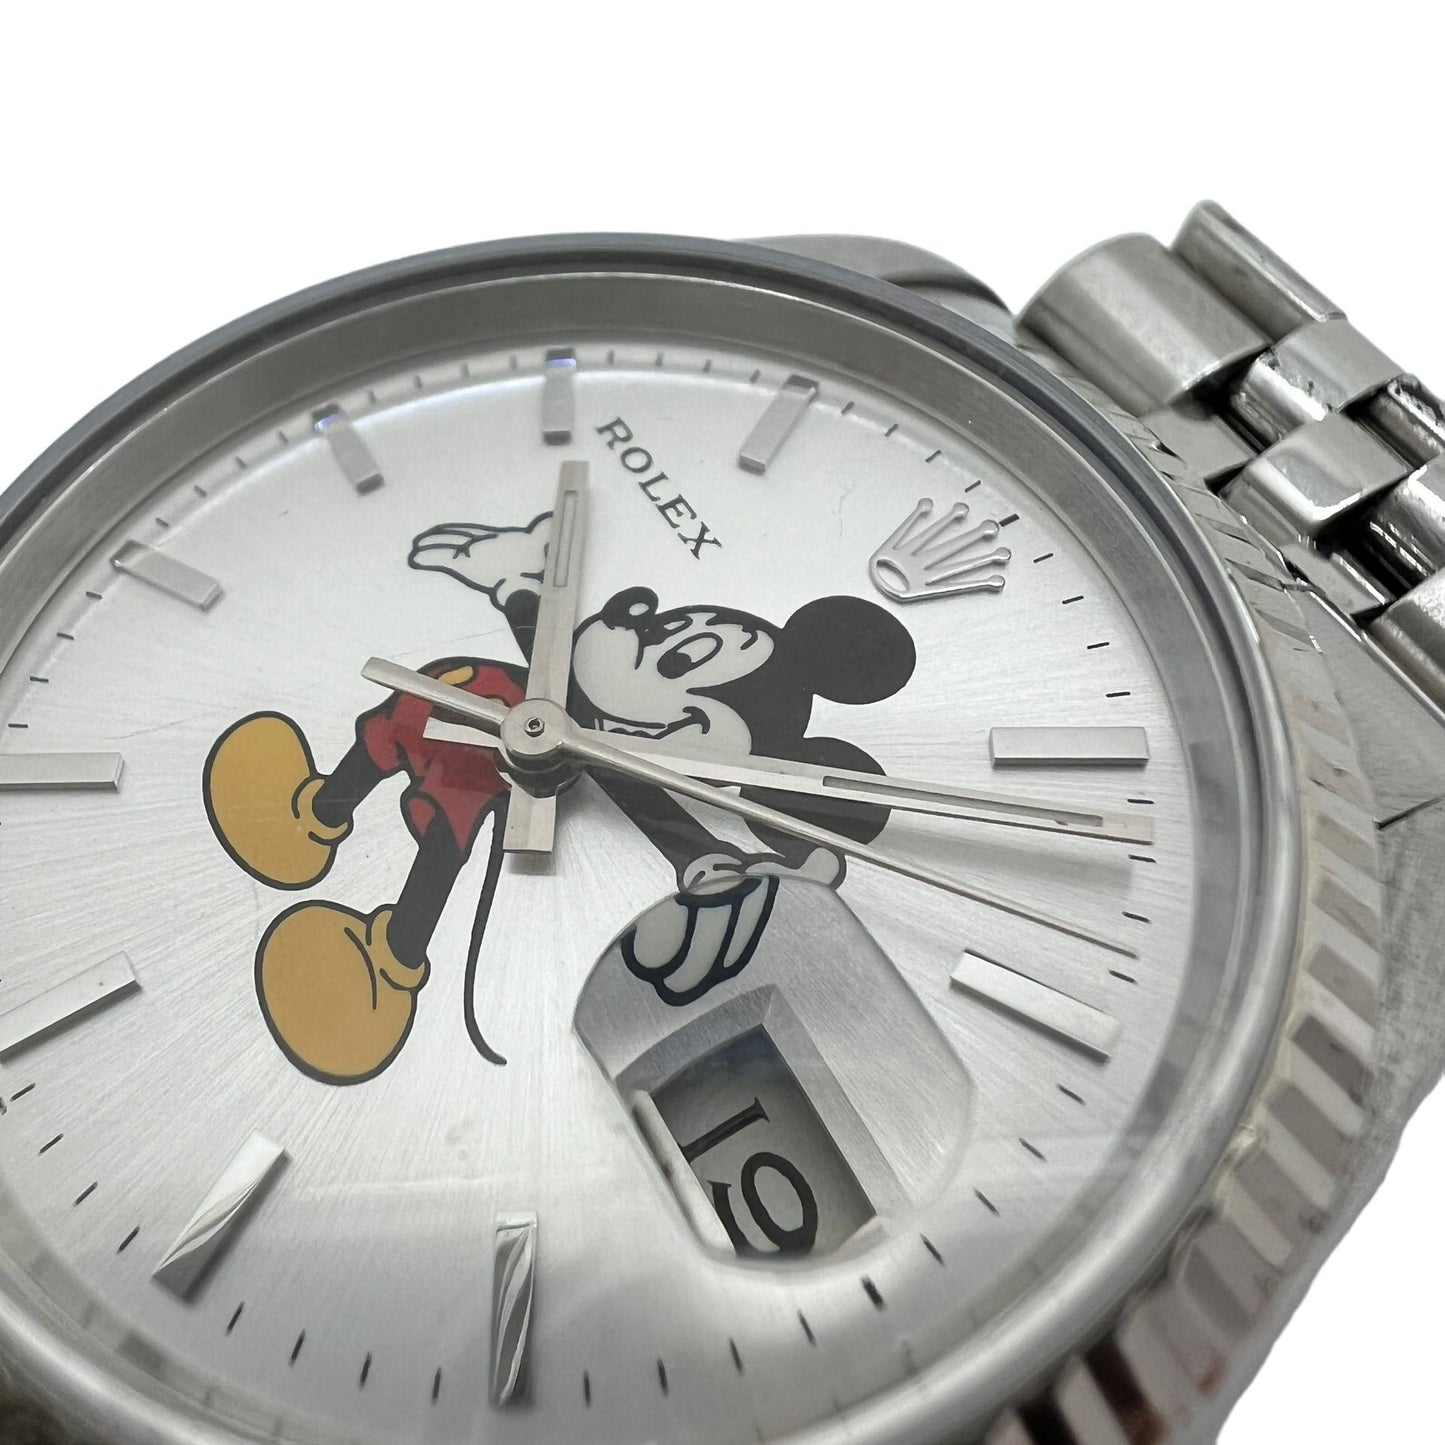 ROLEX DATEJUST 36 MICKEY MOUSE REF. 16234 (1991)